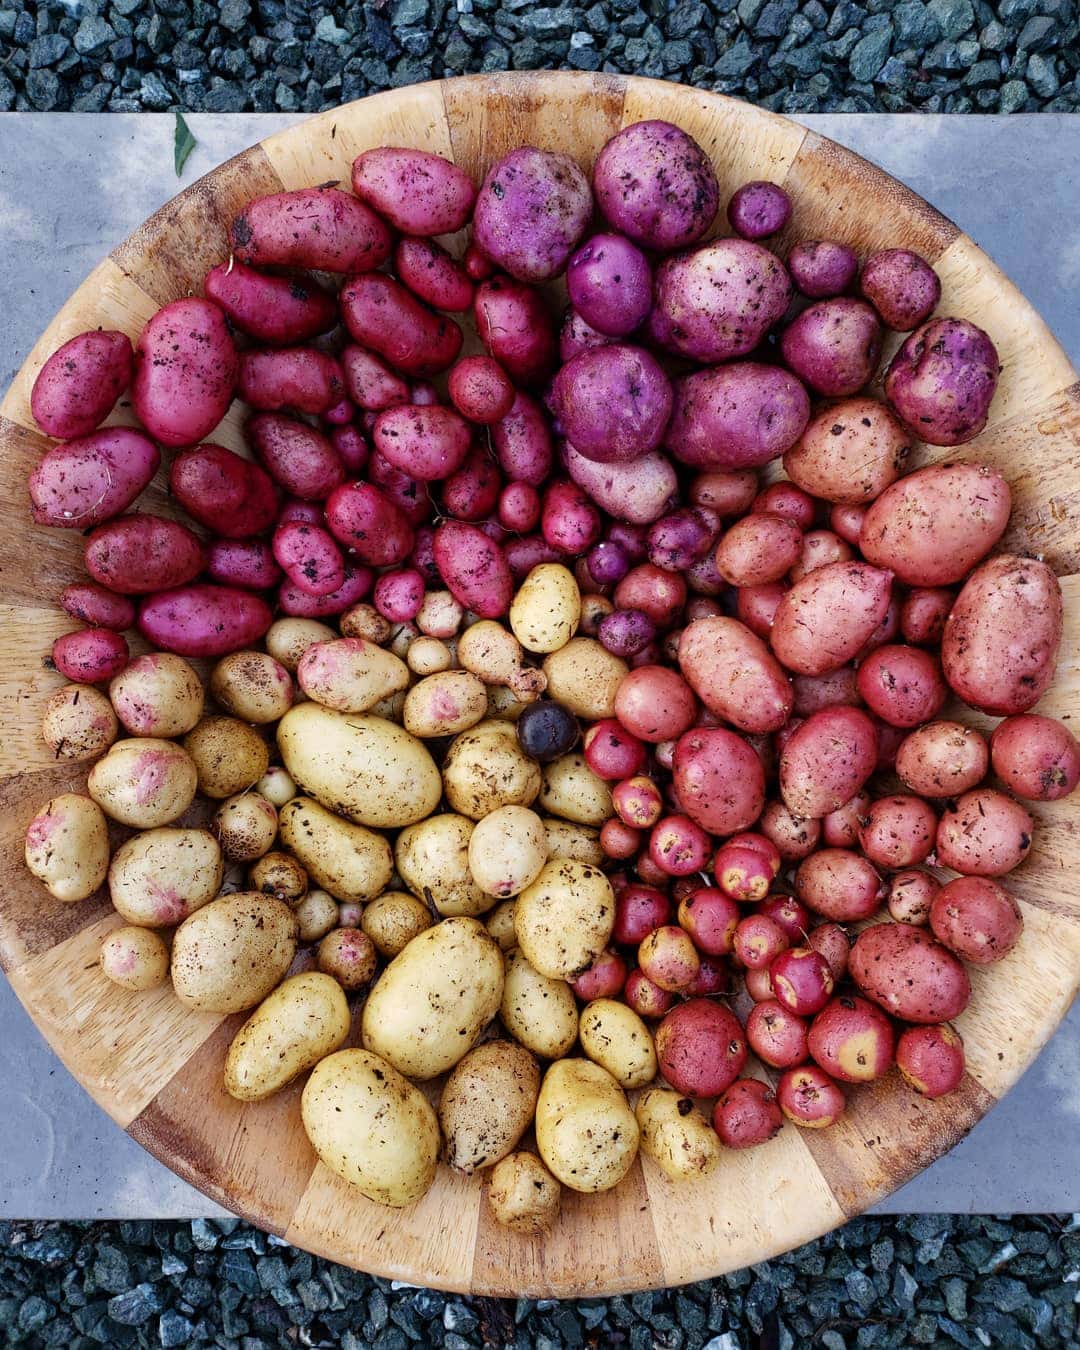 A large wooden bowl full of colorful potatoes. Some are purple, red, yellow with pink spots, and plain yellow. They are separated by color.